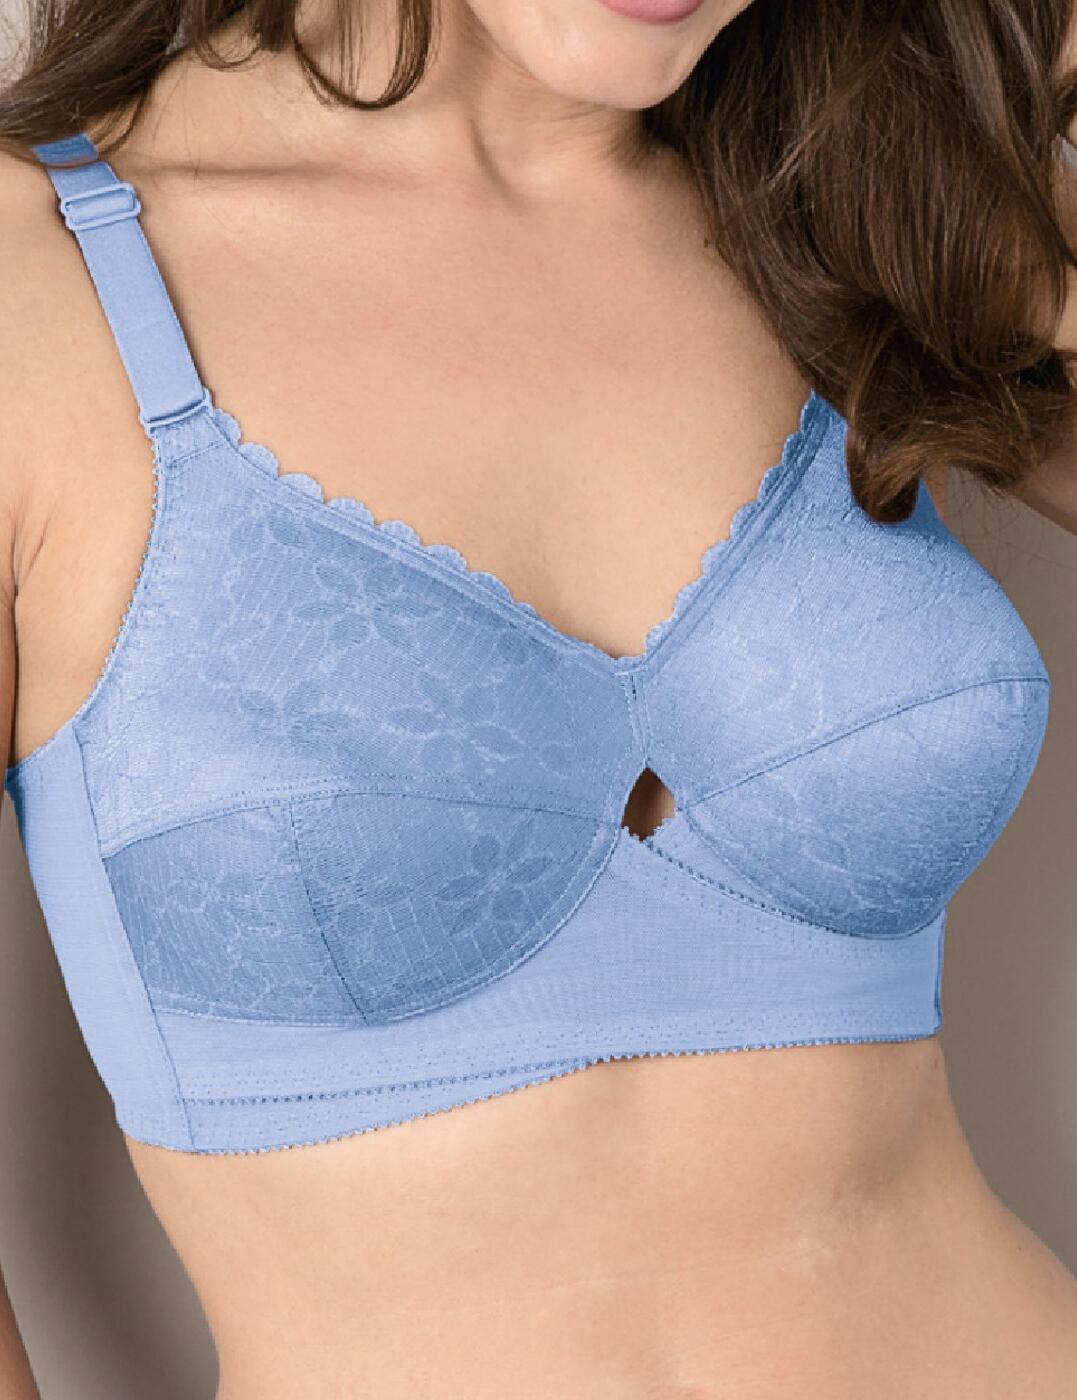 Berlei Classic Non Wired Support Bra B Womens Full Cup Everyday Bras